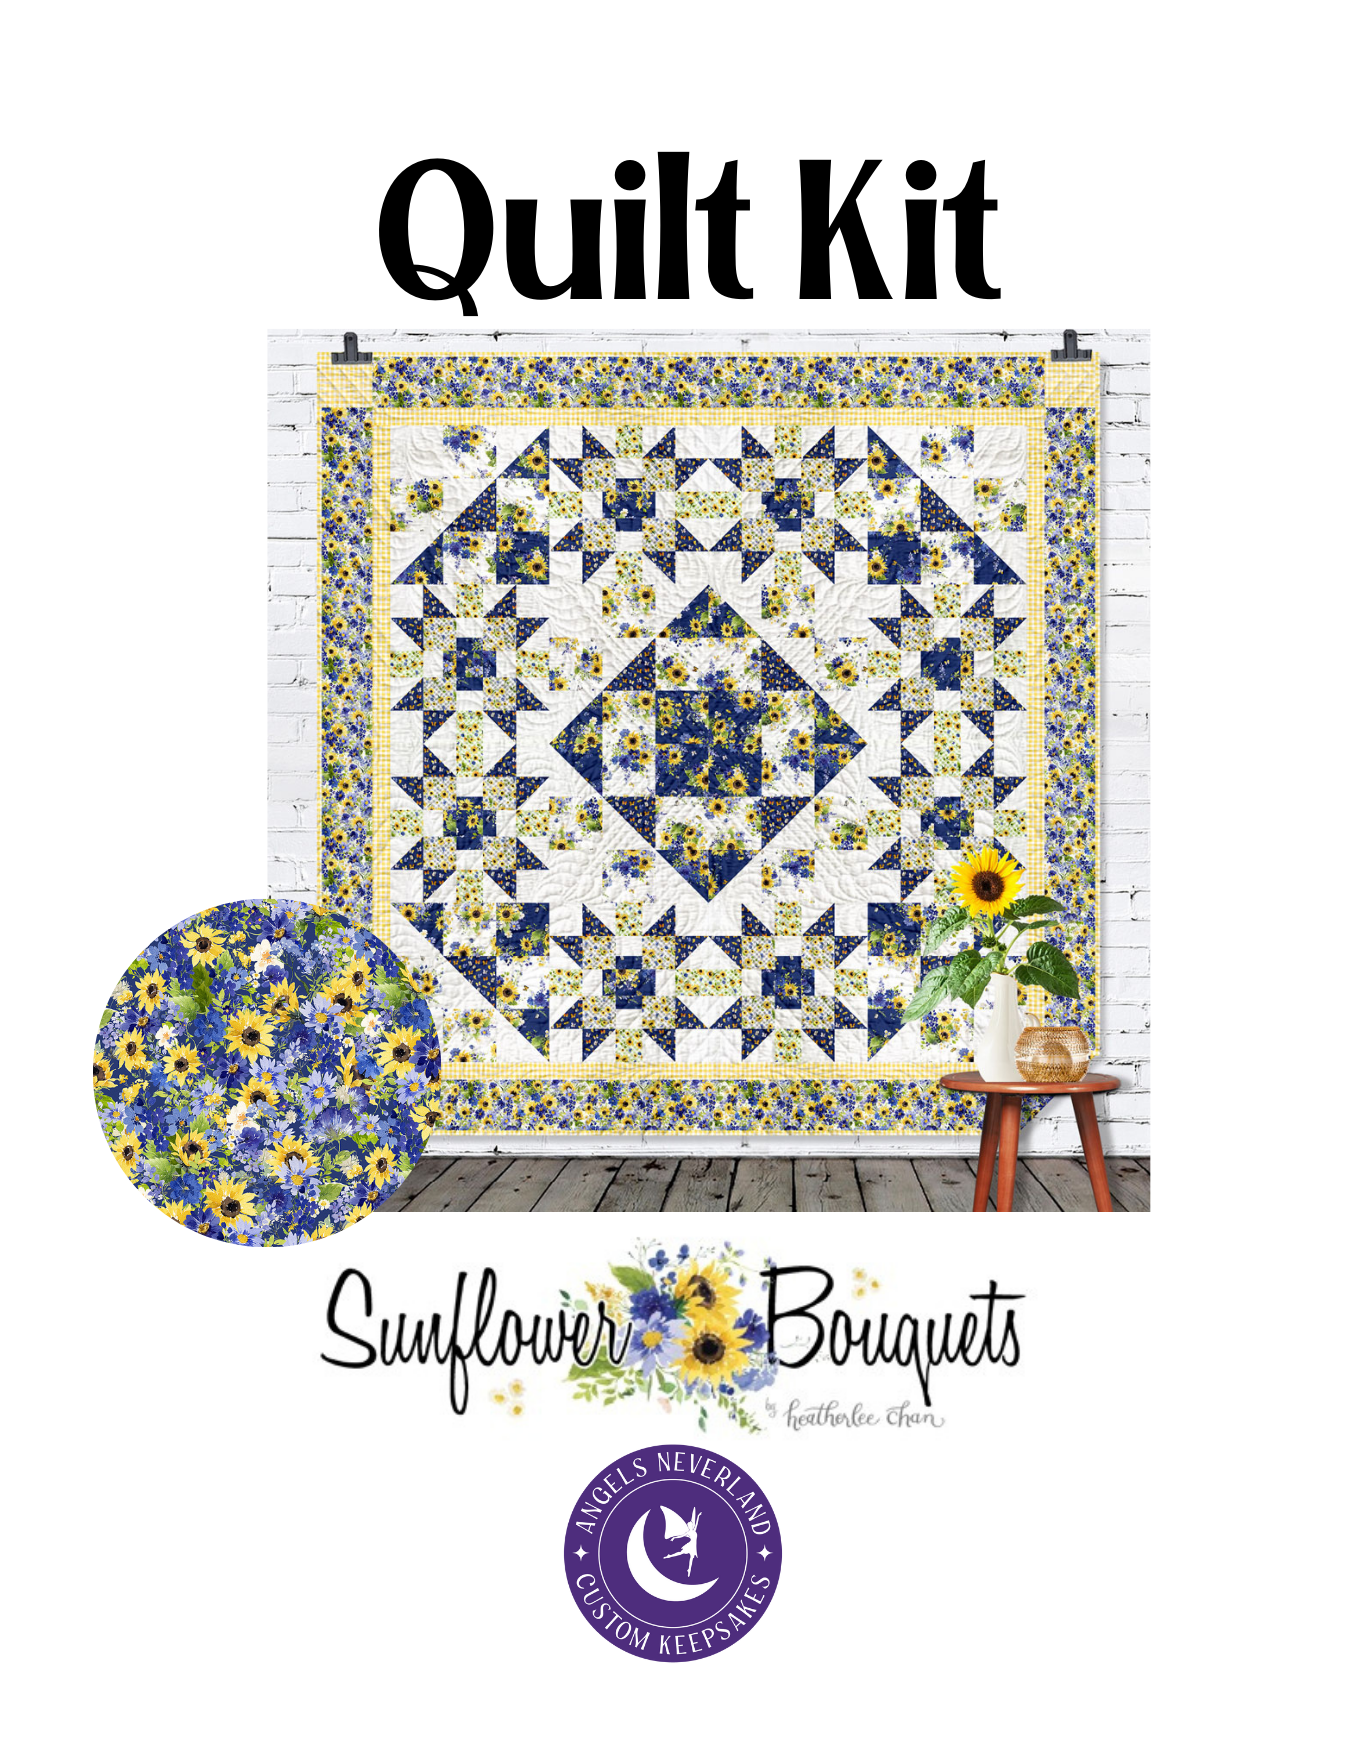 Sunflower Bouquets Rotating Stars QUILT KIT (yellow) approximate finished size 88" x 88